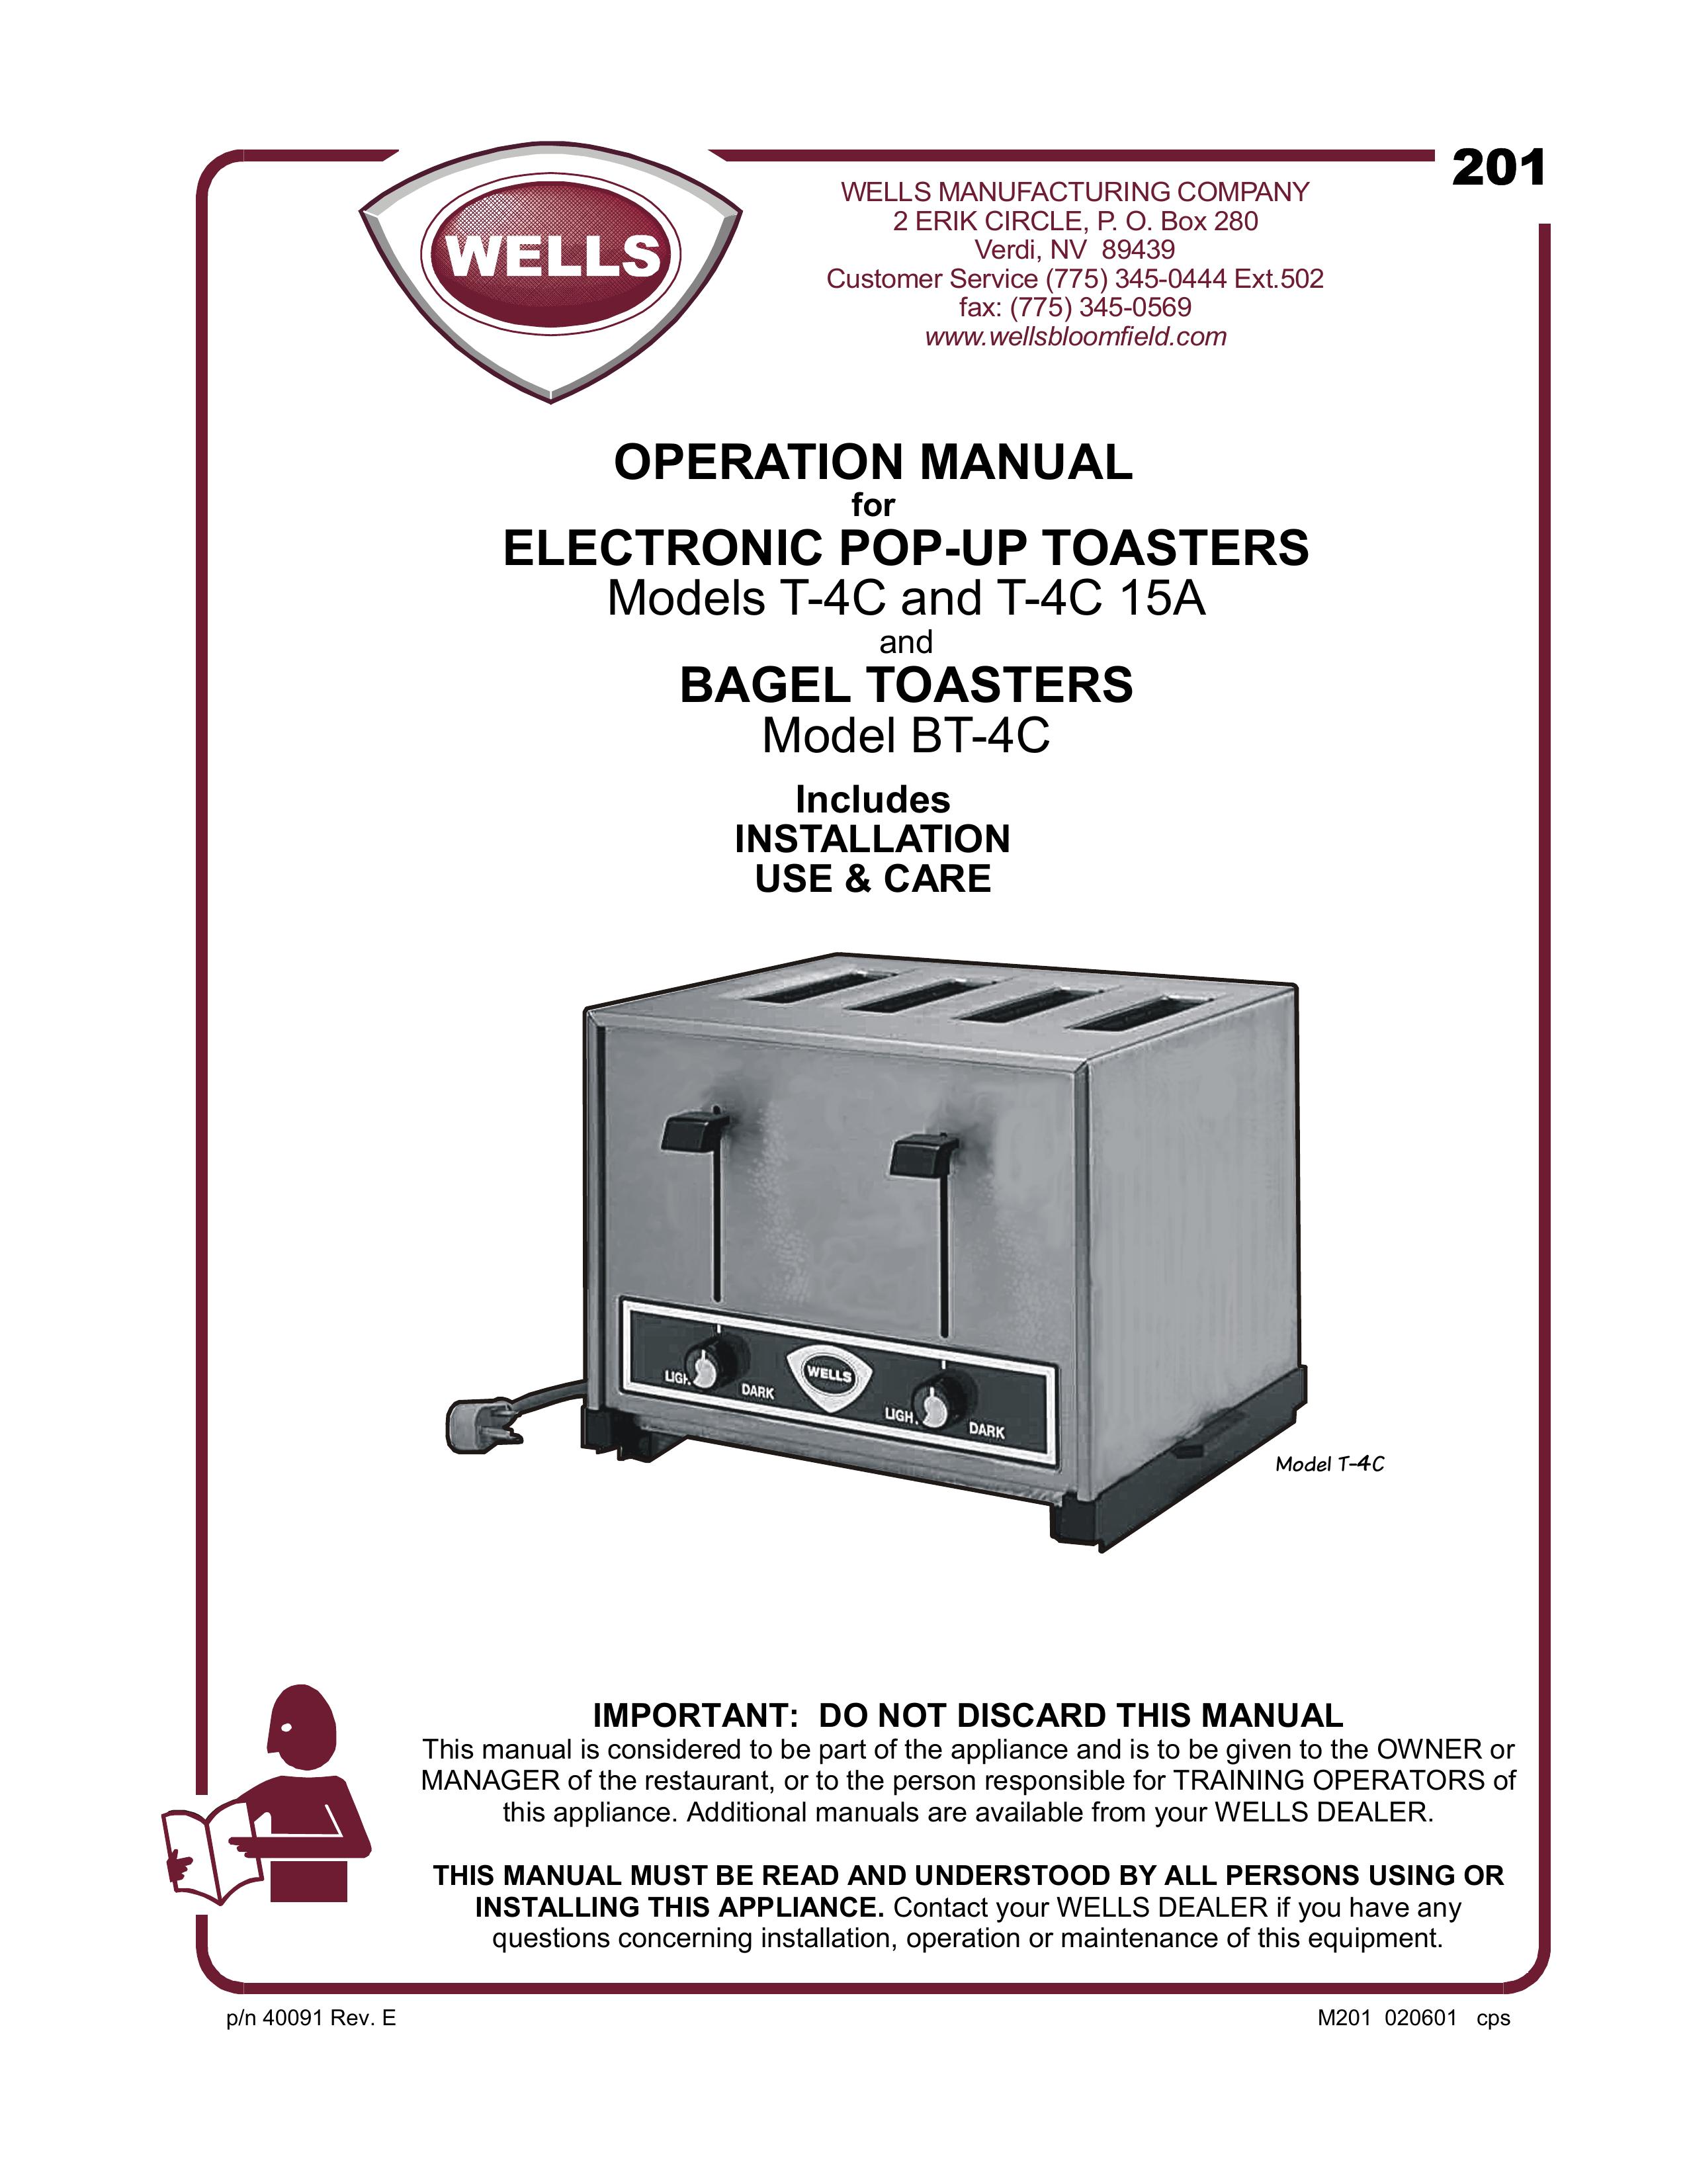 Wells T-4C, T-4C 15A Toaster User Manual